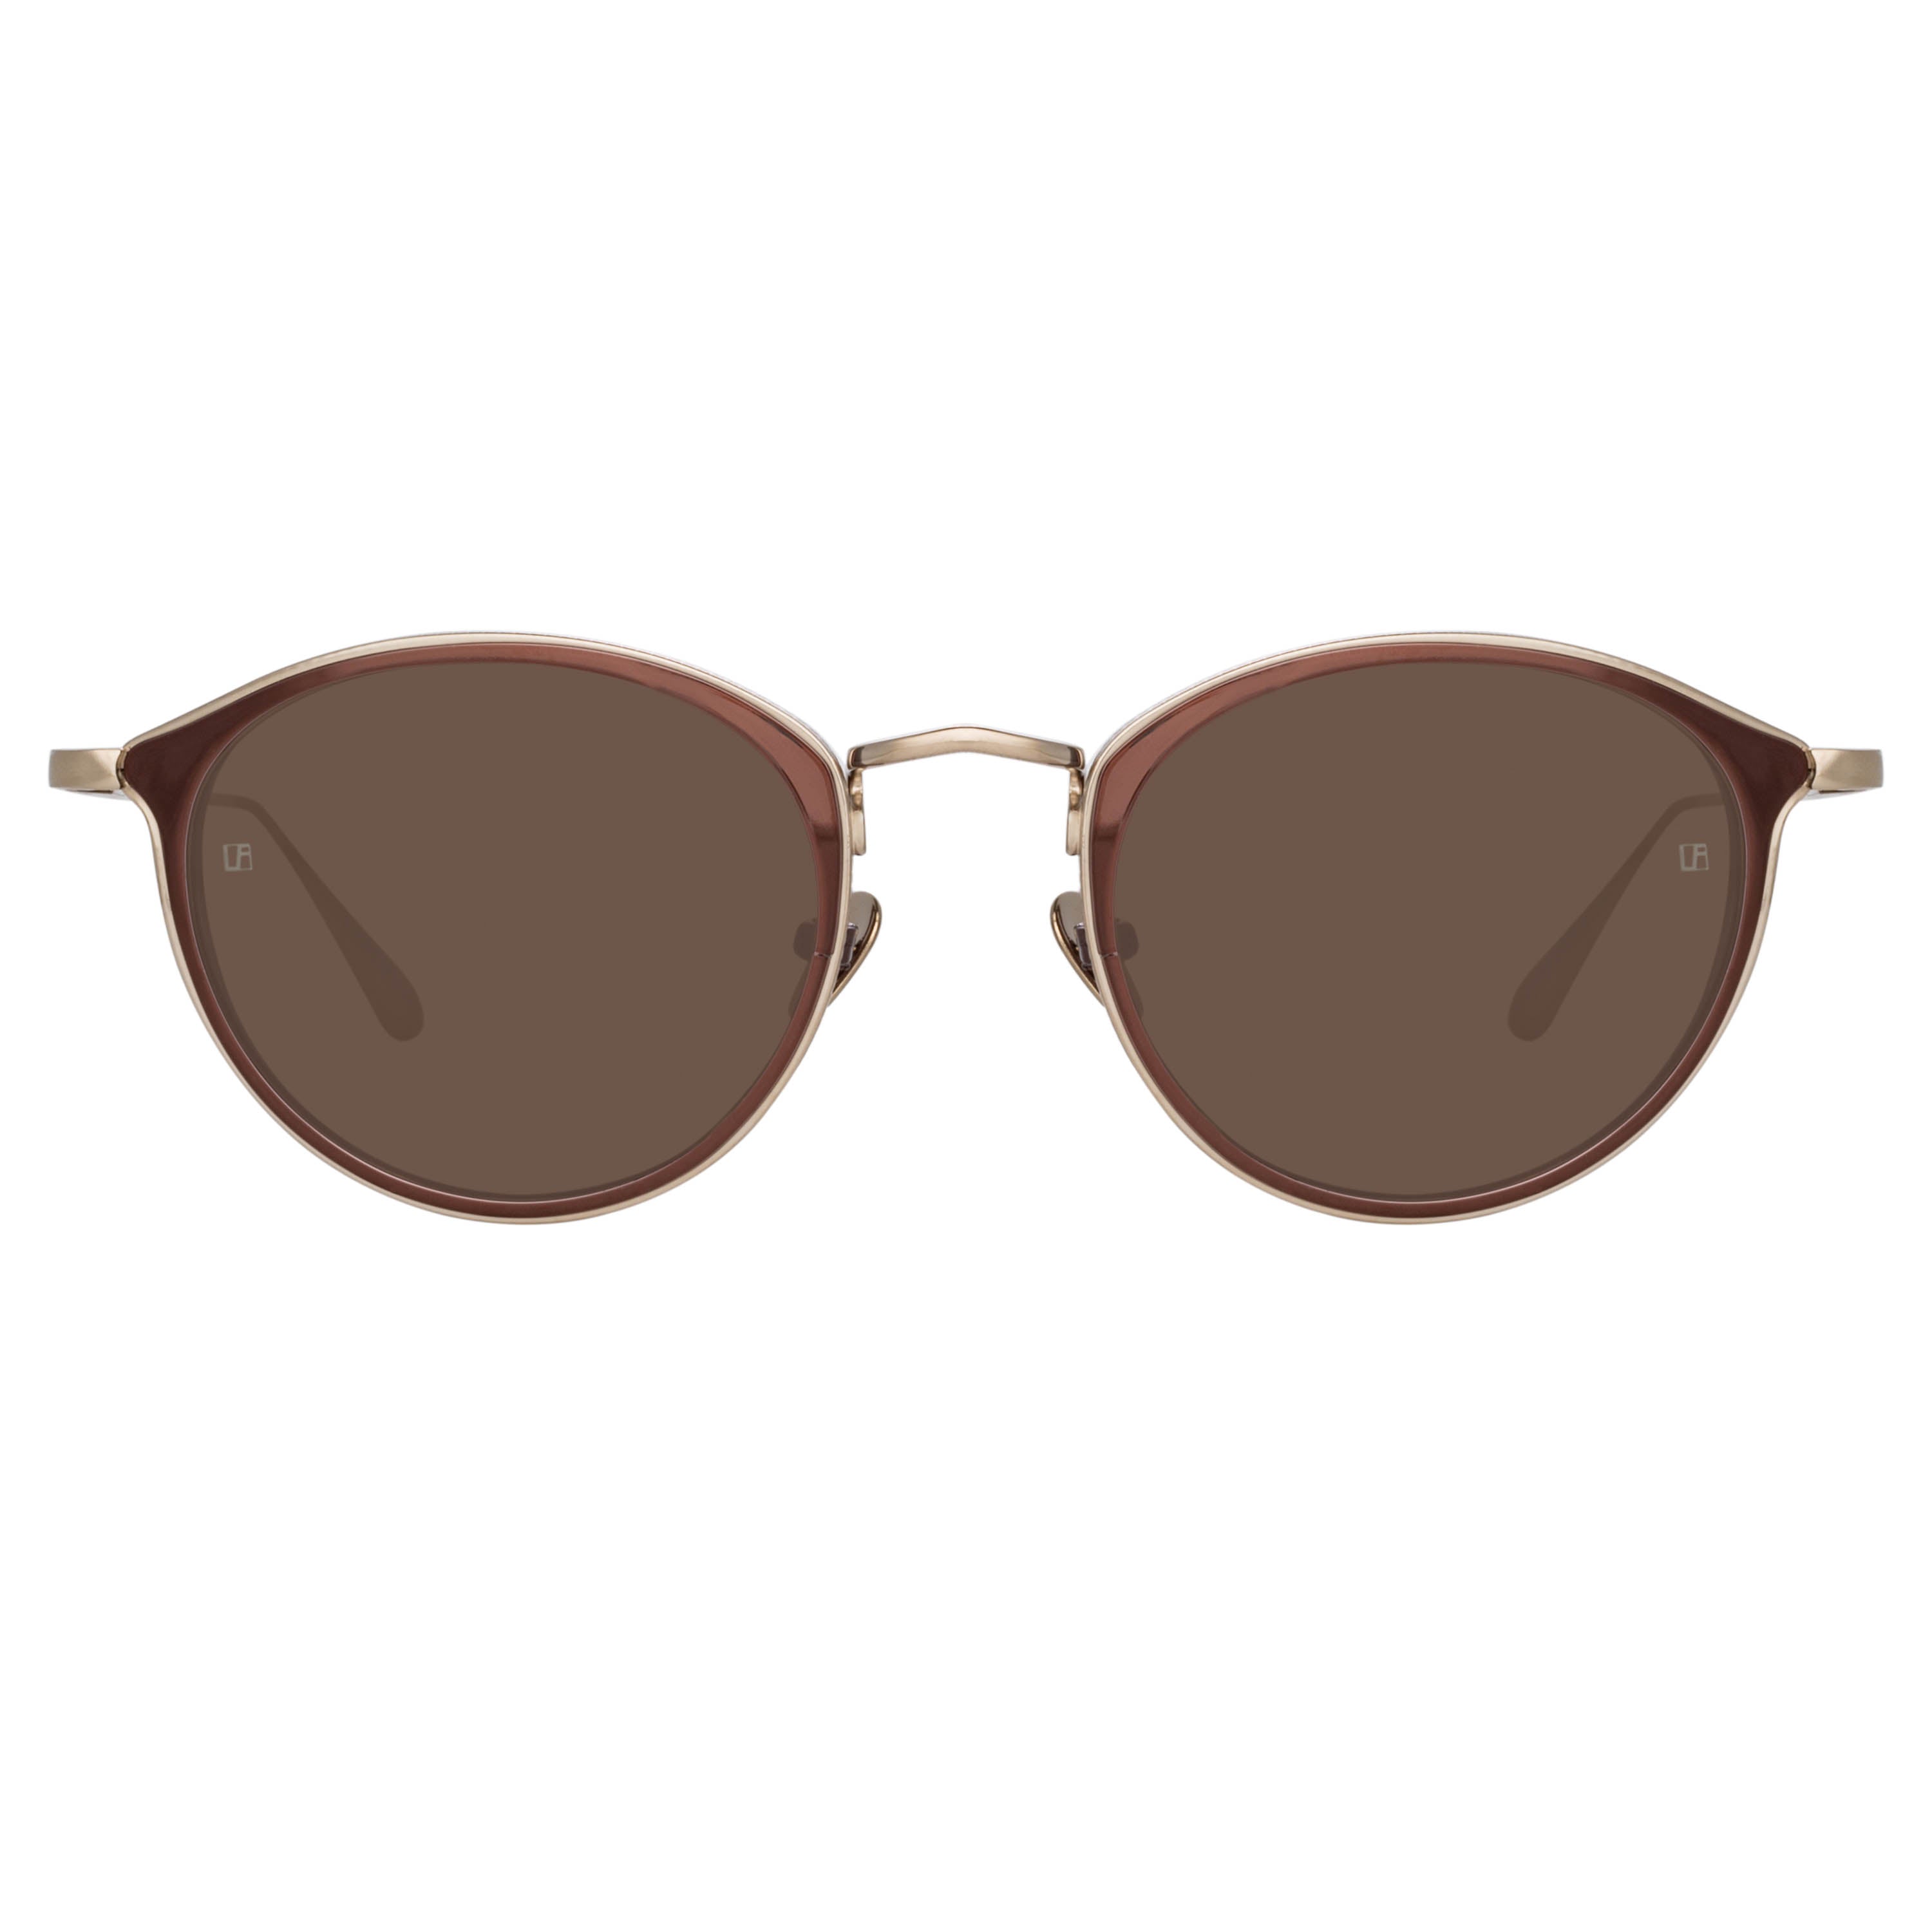 Luis Oval Sunglasses in Light Gold and Brown